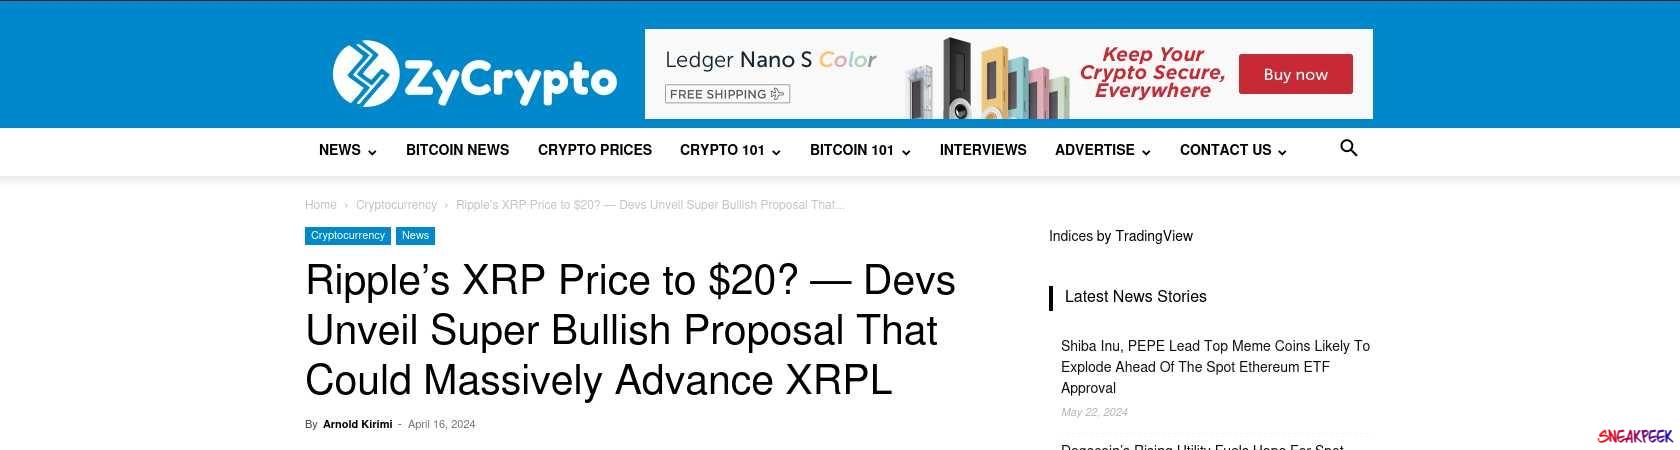 Read the full Article:  ⭲ Ripple’s XRP Price to $20? — Devs Unveil Super Bullish Proposal That Could Massively Advance XRPL